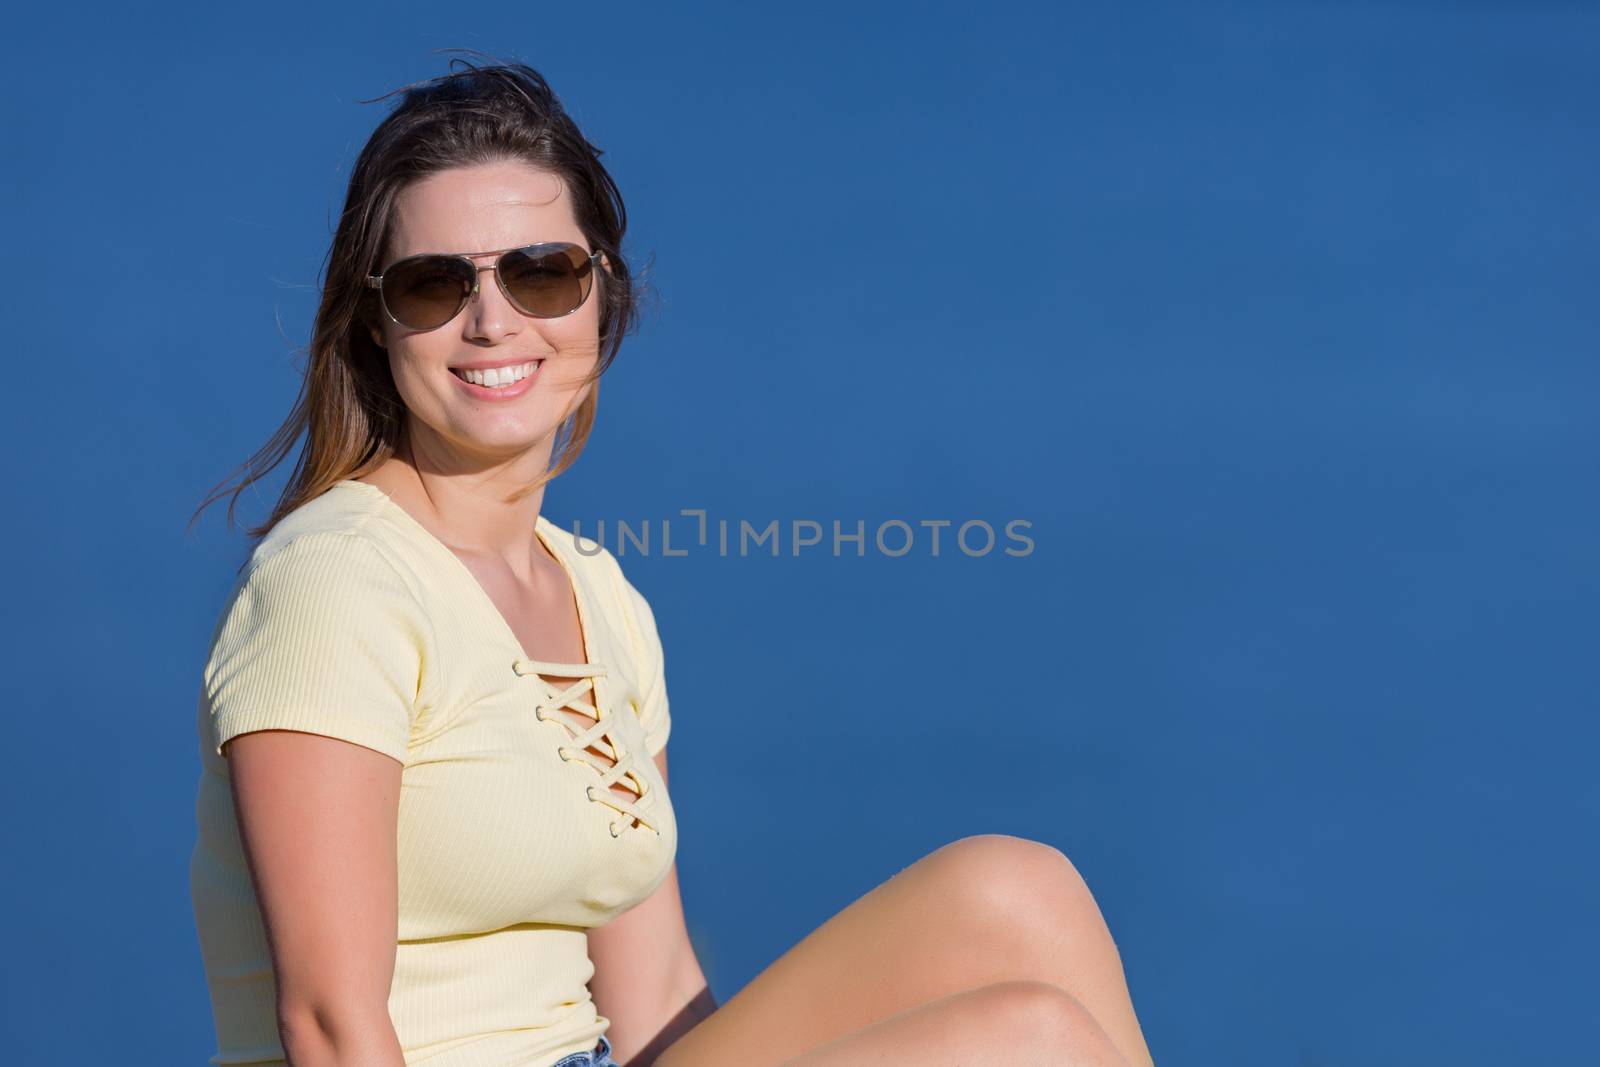 Young happy woman sitting on the rock mountain, relaxing and enjoying the lake at Geres, Portuguese National Park